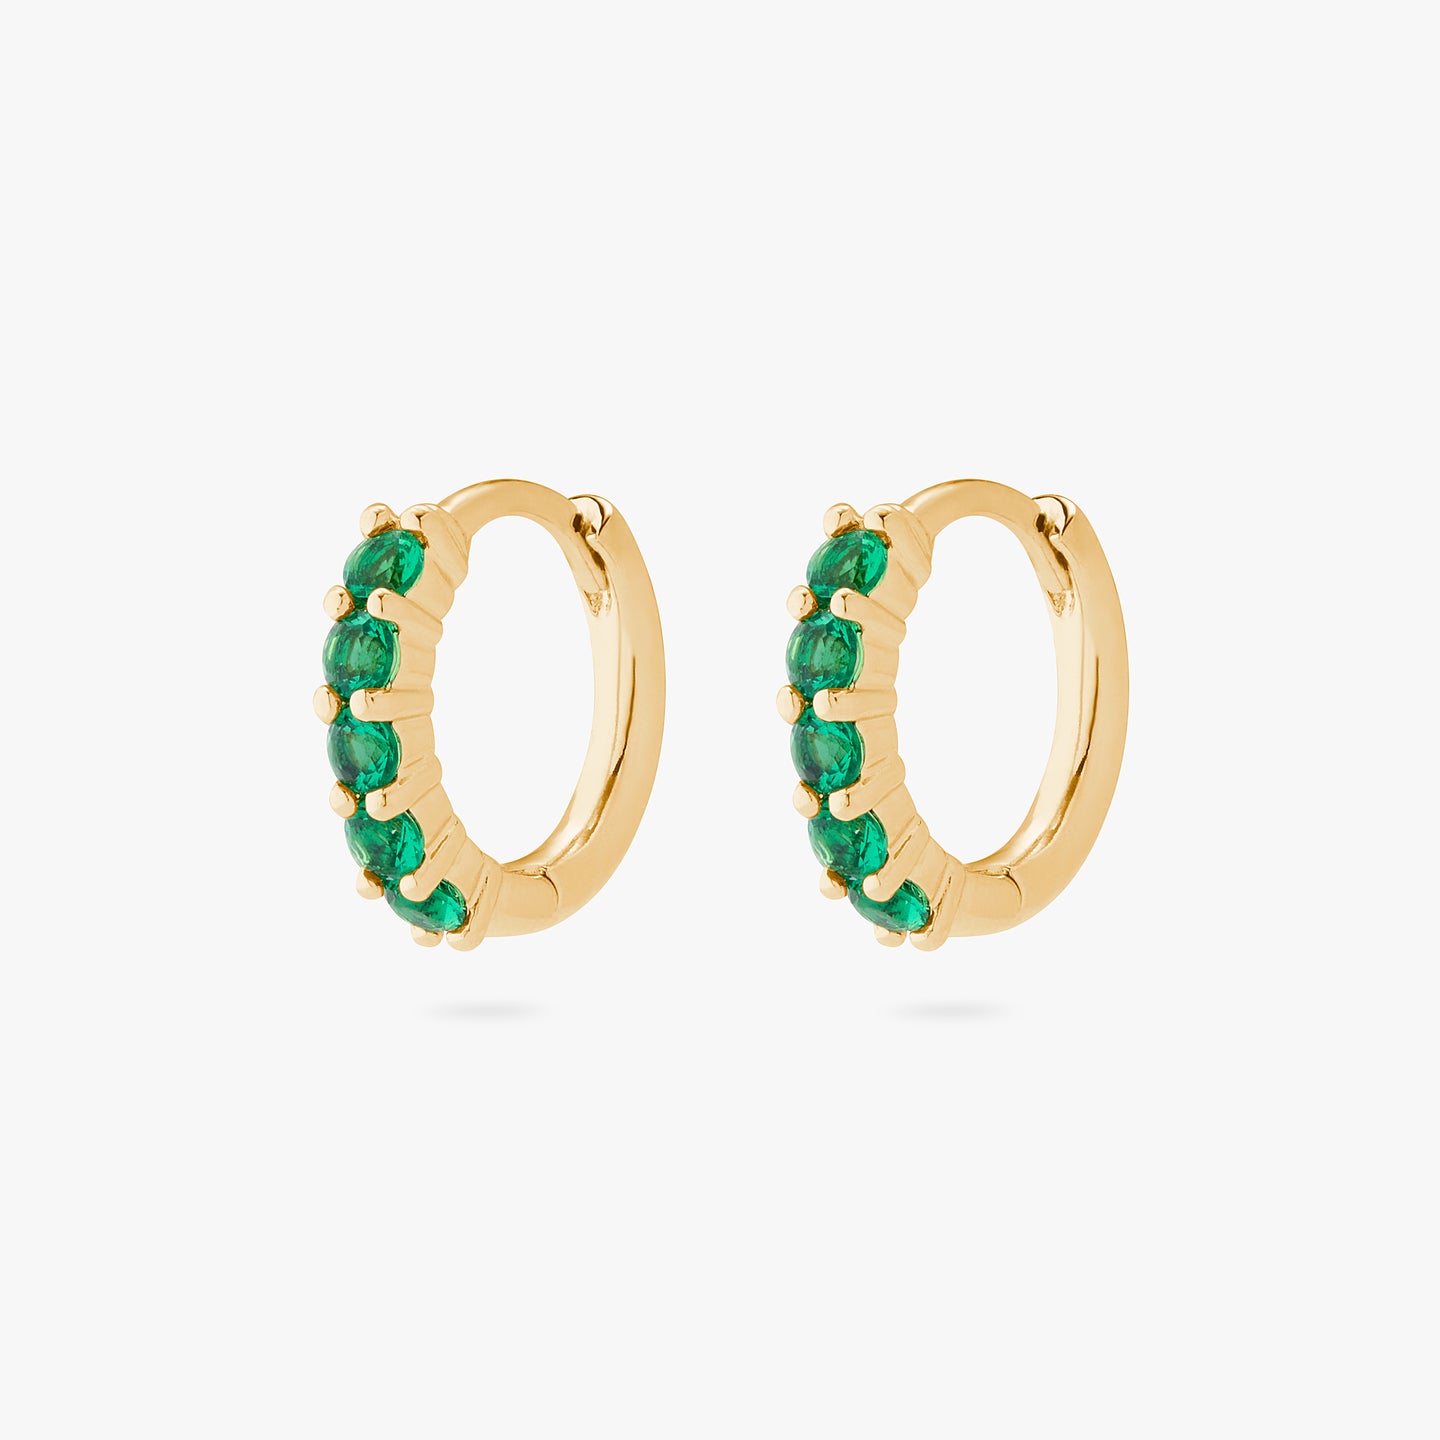 An image of a pair of gold/green pave huggies with max pave stones. [hover]  [pair] color:null|gold/green